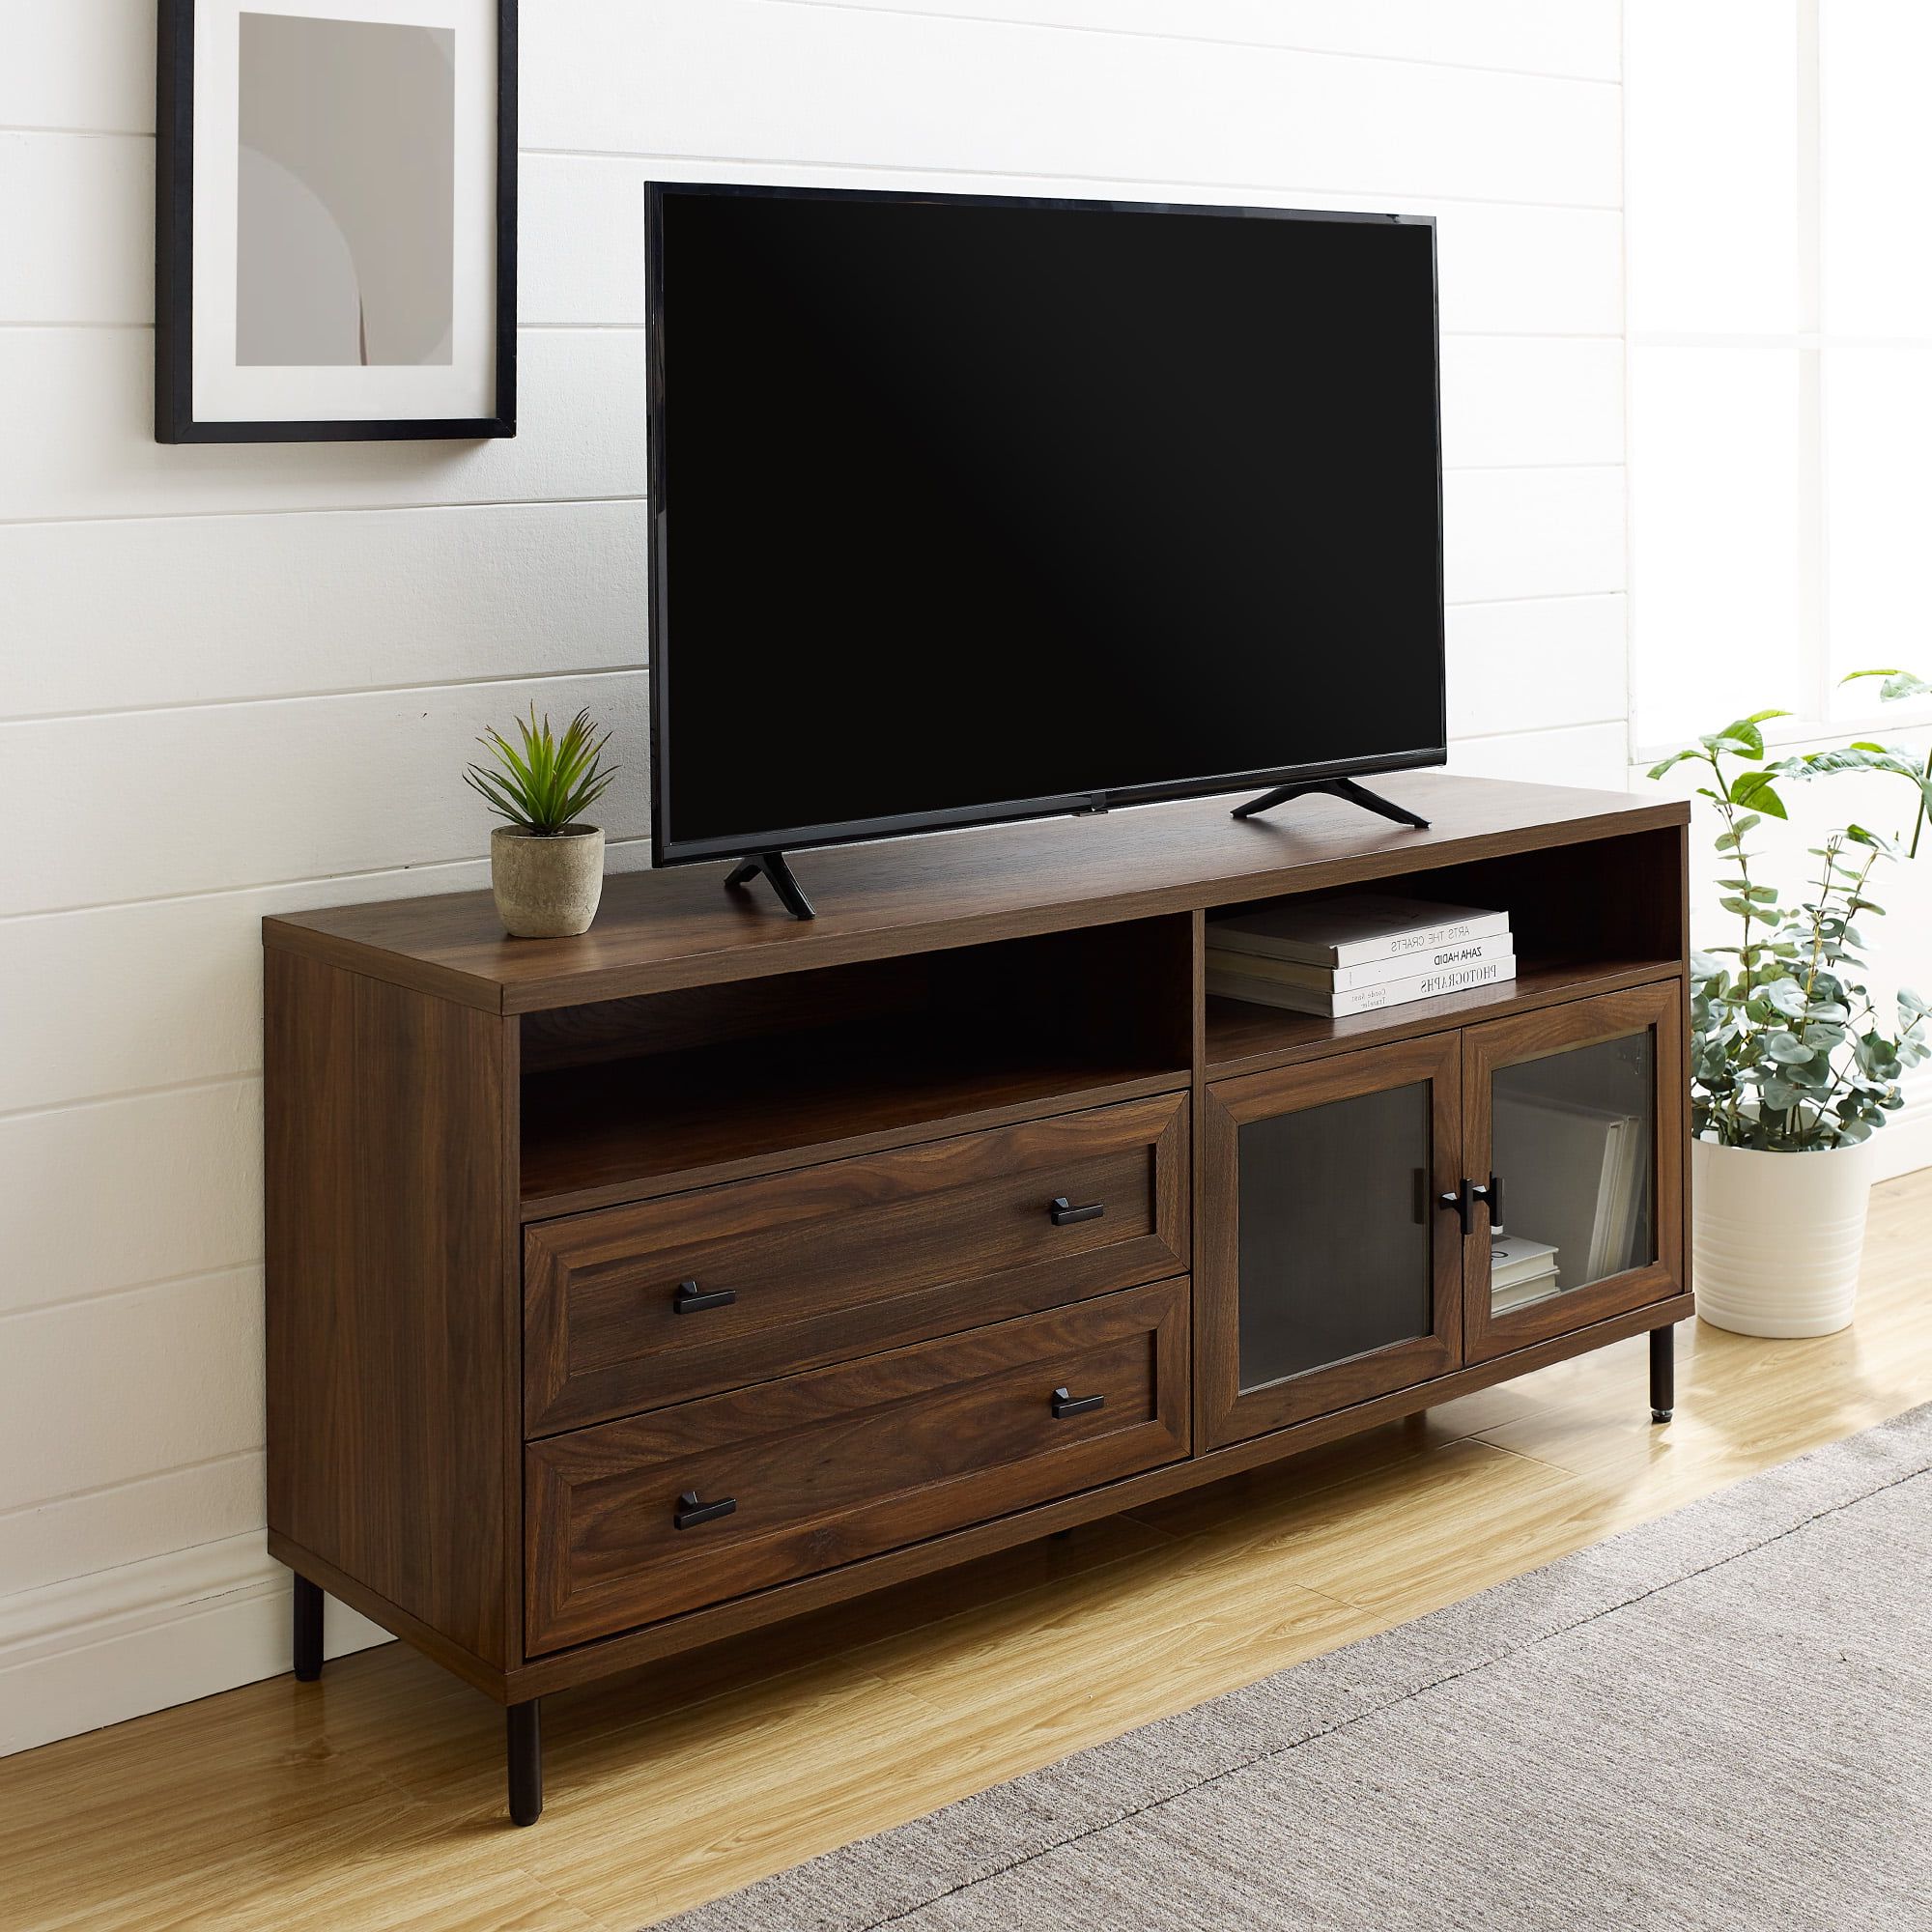 Manor Park Modern Wood And Glass Tv Stand For Tvs Up To 60", Dark Walnut –  Walmart With Walnut Entertainment Centers (View 9 of 20)